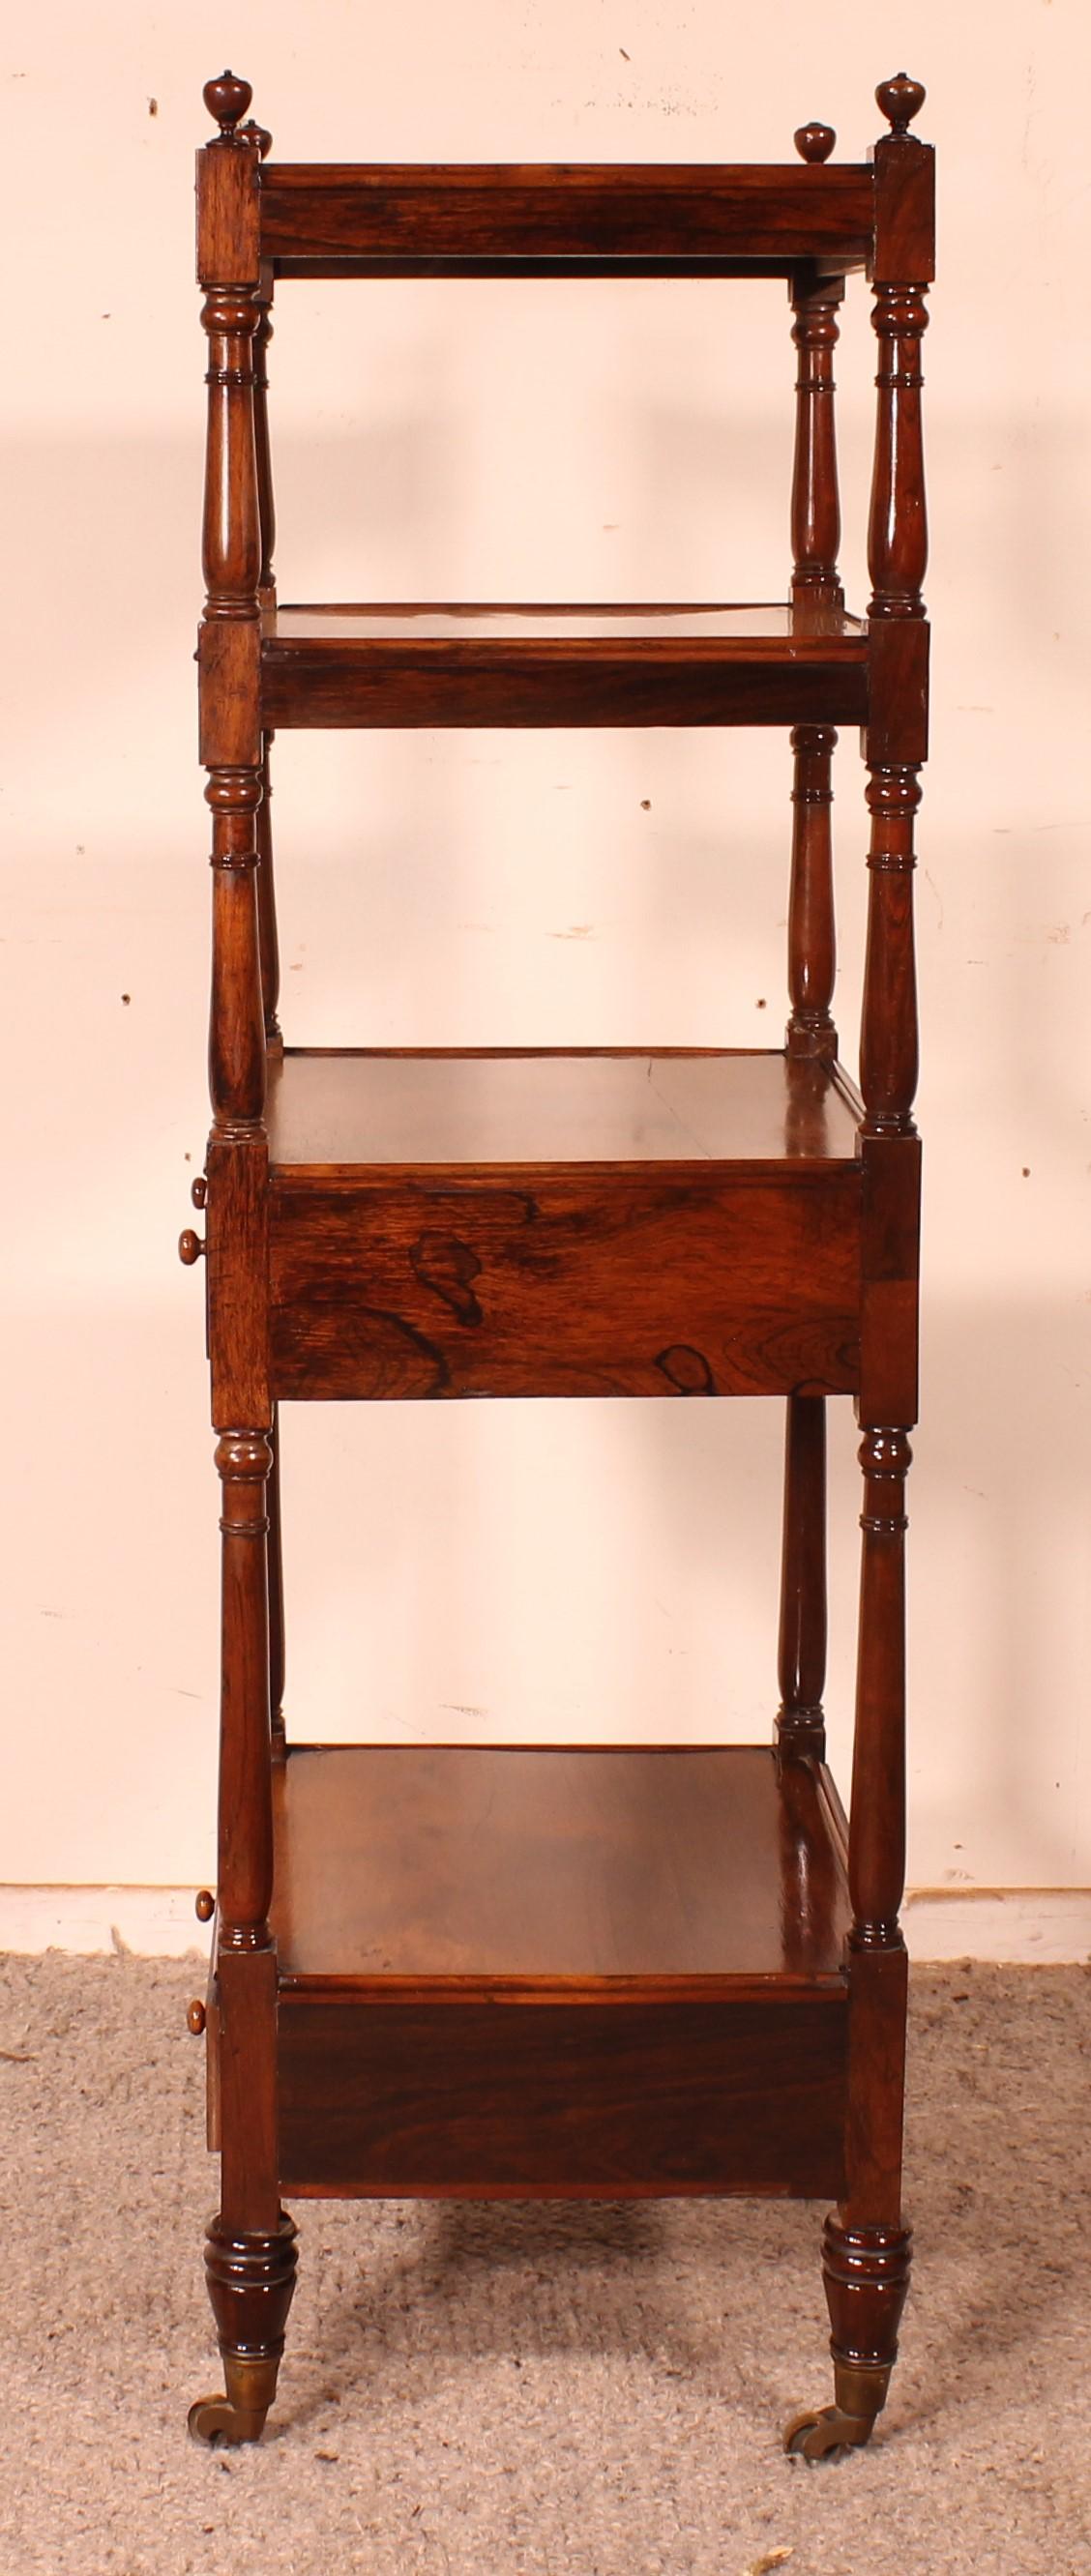 Rosewood Whatnot Or Shelf From 19th Century - England 4